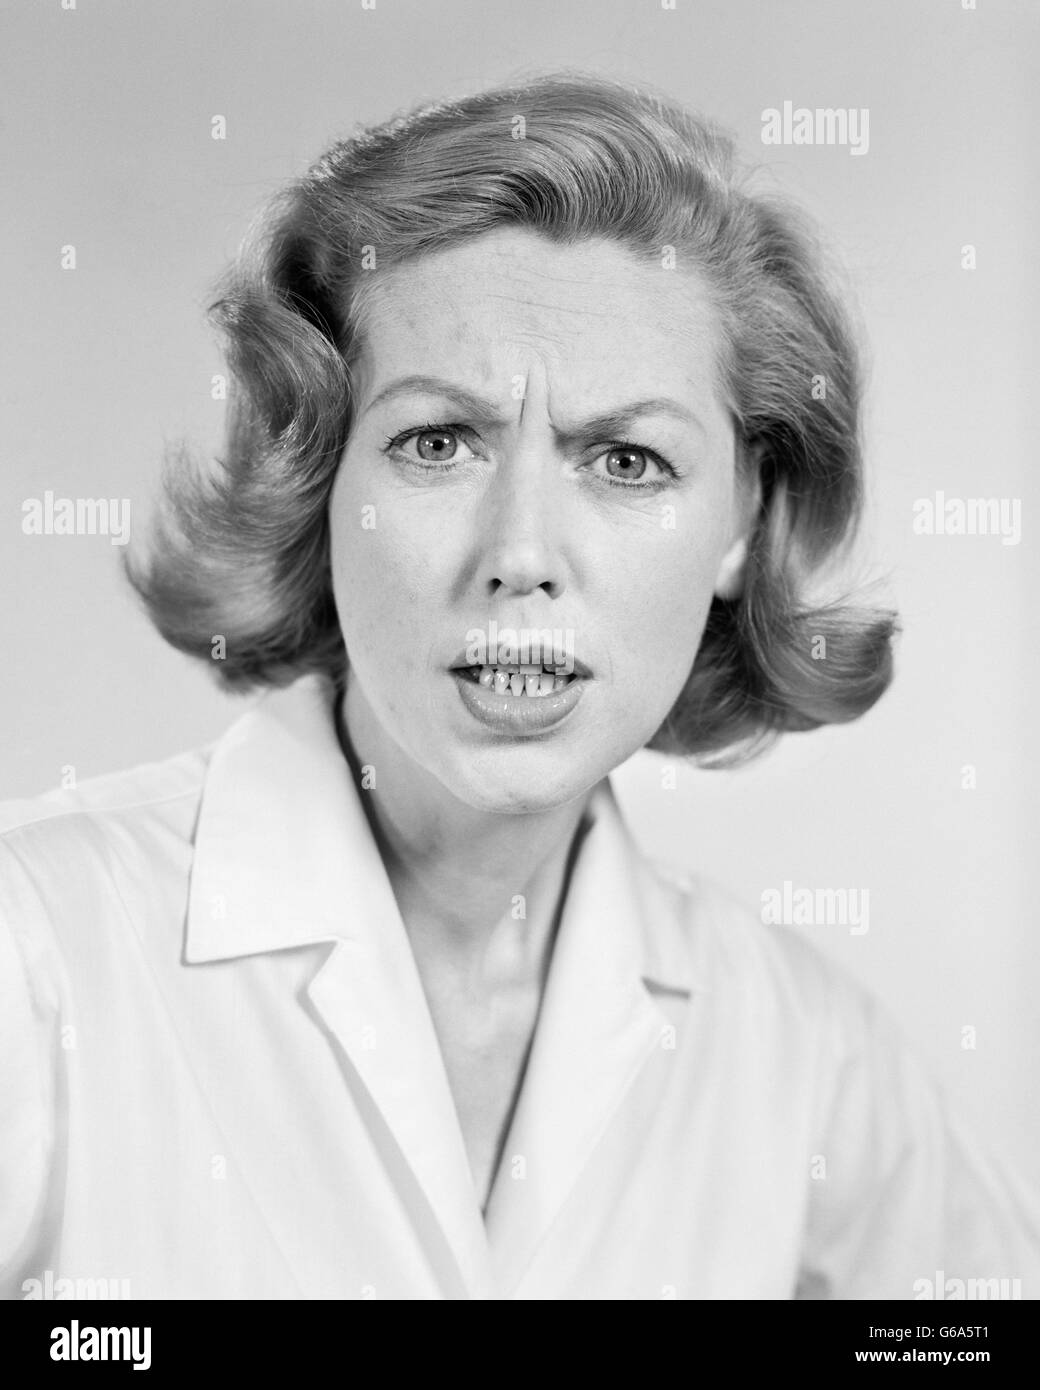 1950s 1960s PORTRAIT WOMAN ANGRY FACIAL EXPRESSION Stock Photo